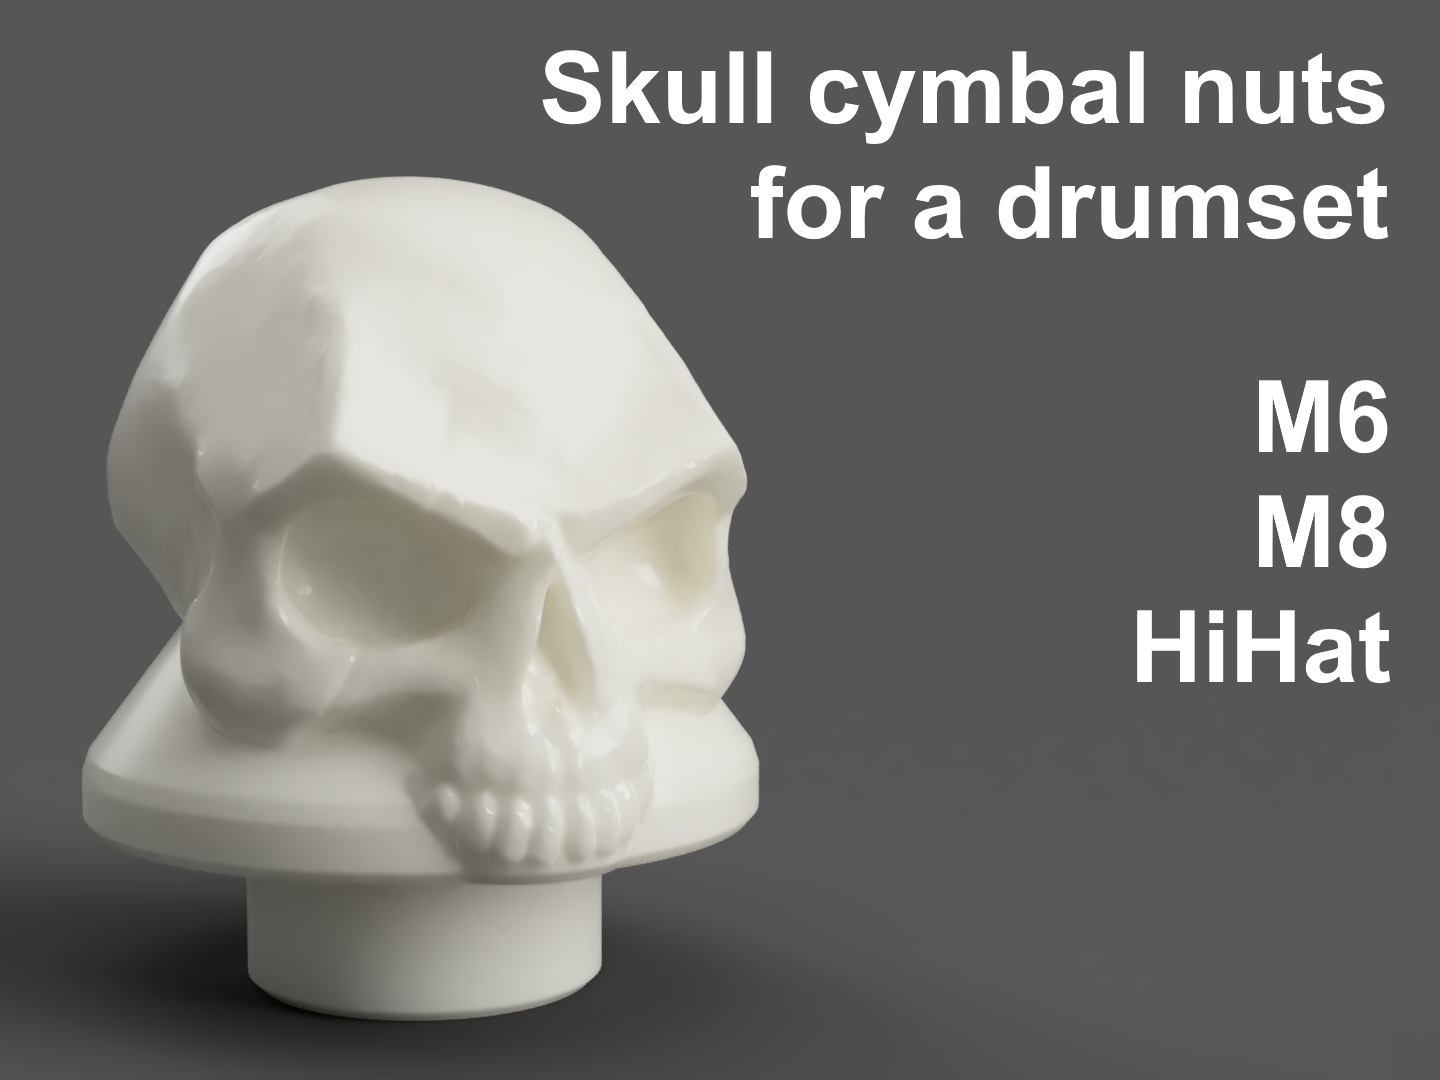 Skull cymbal nuts for a drumset